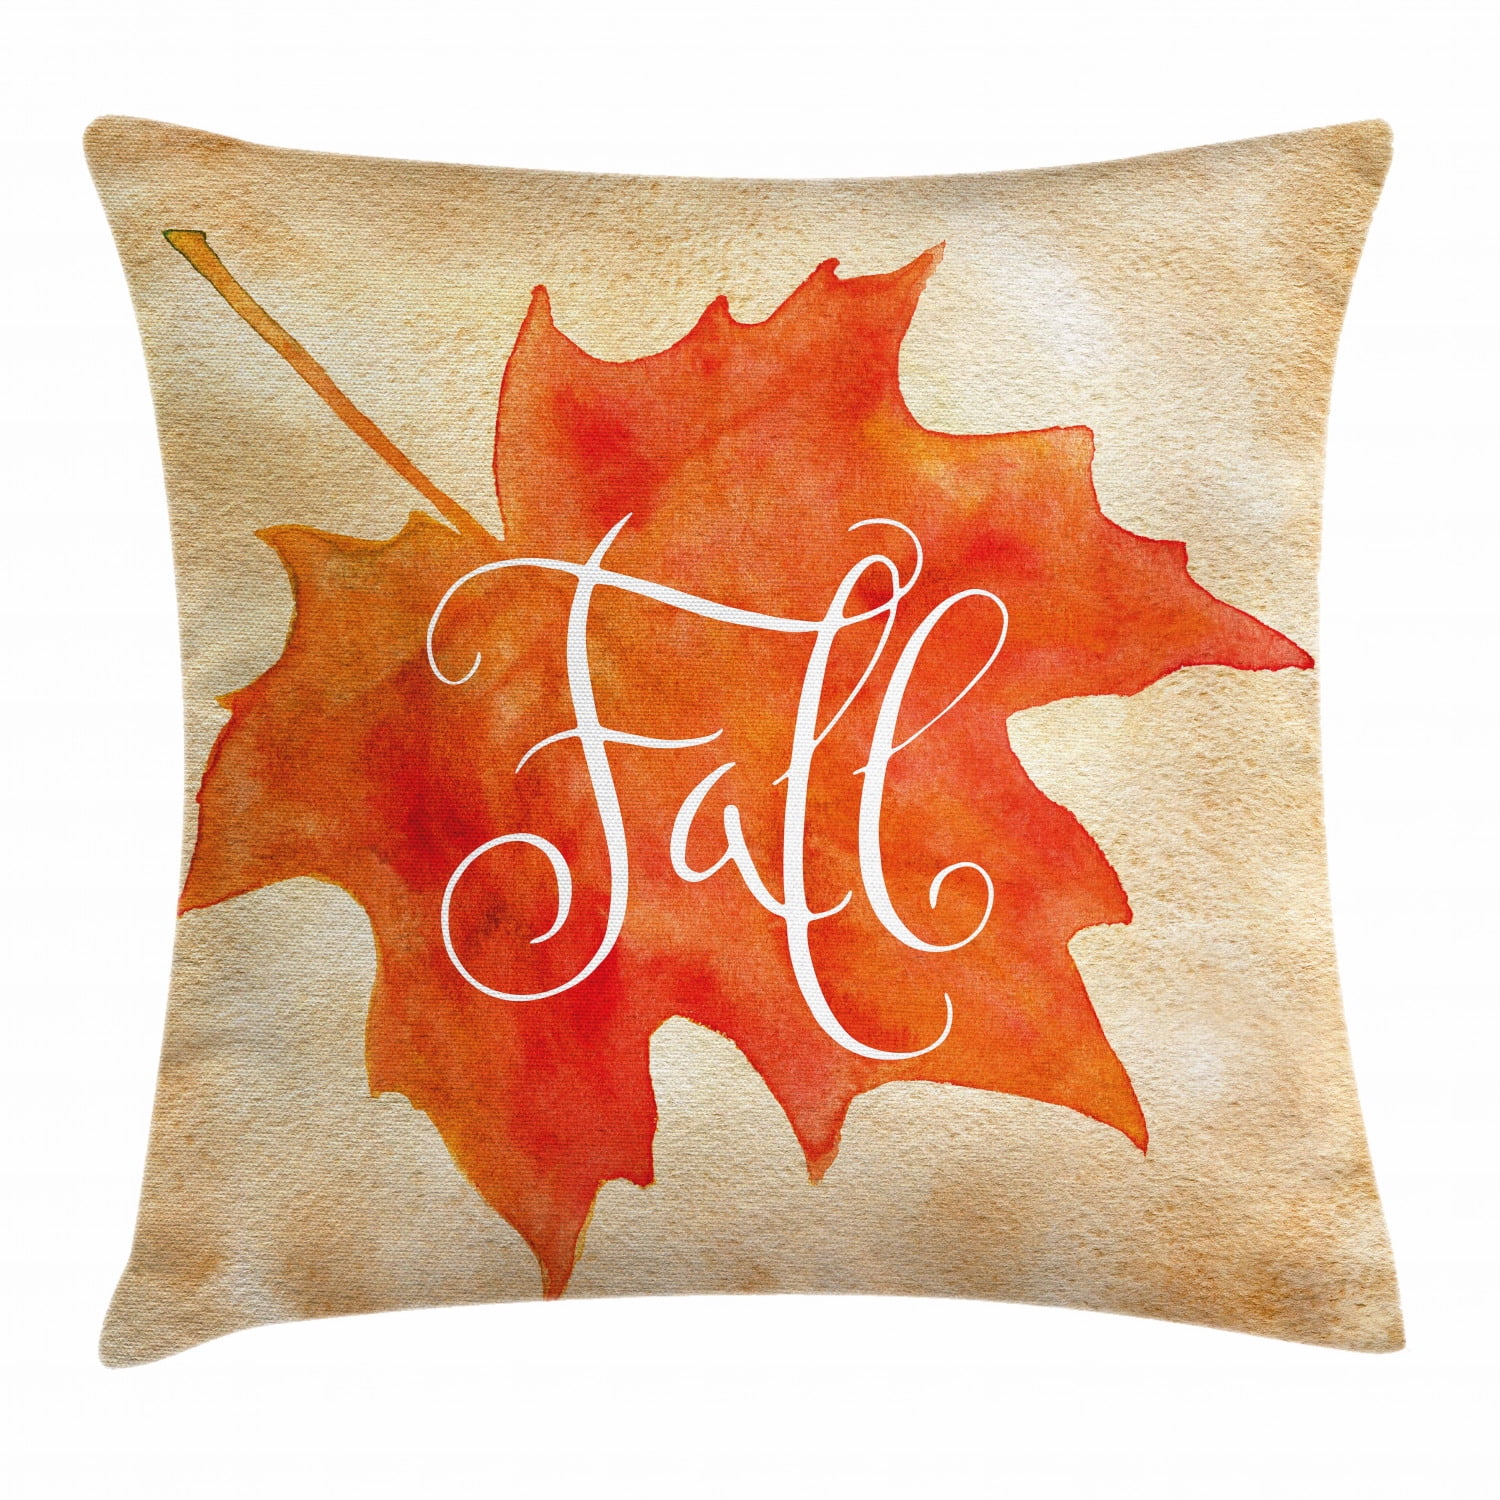 Ambesonne Fall Throw Pillow Cushion Cover Decorative Square Accent Pillow Case 16 X 16 Brown Orange Vivid Watercolor Style Maple Leaf Fall Word on Vintage Backdrop